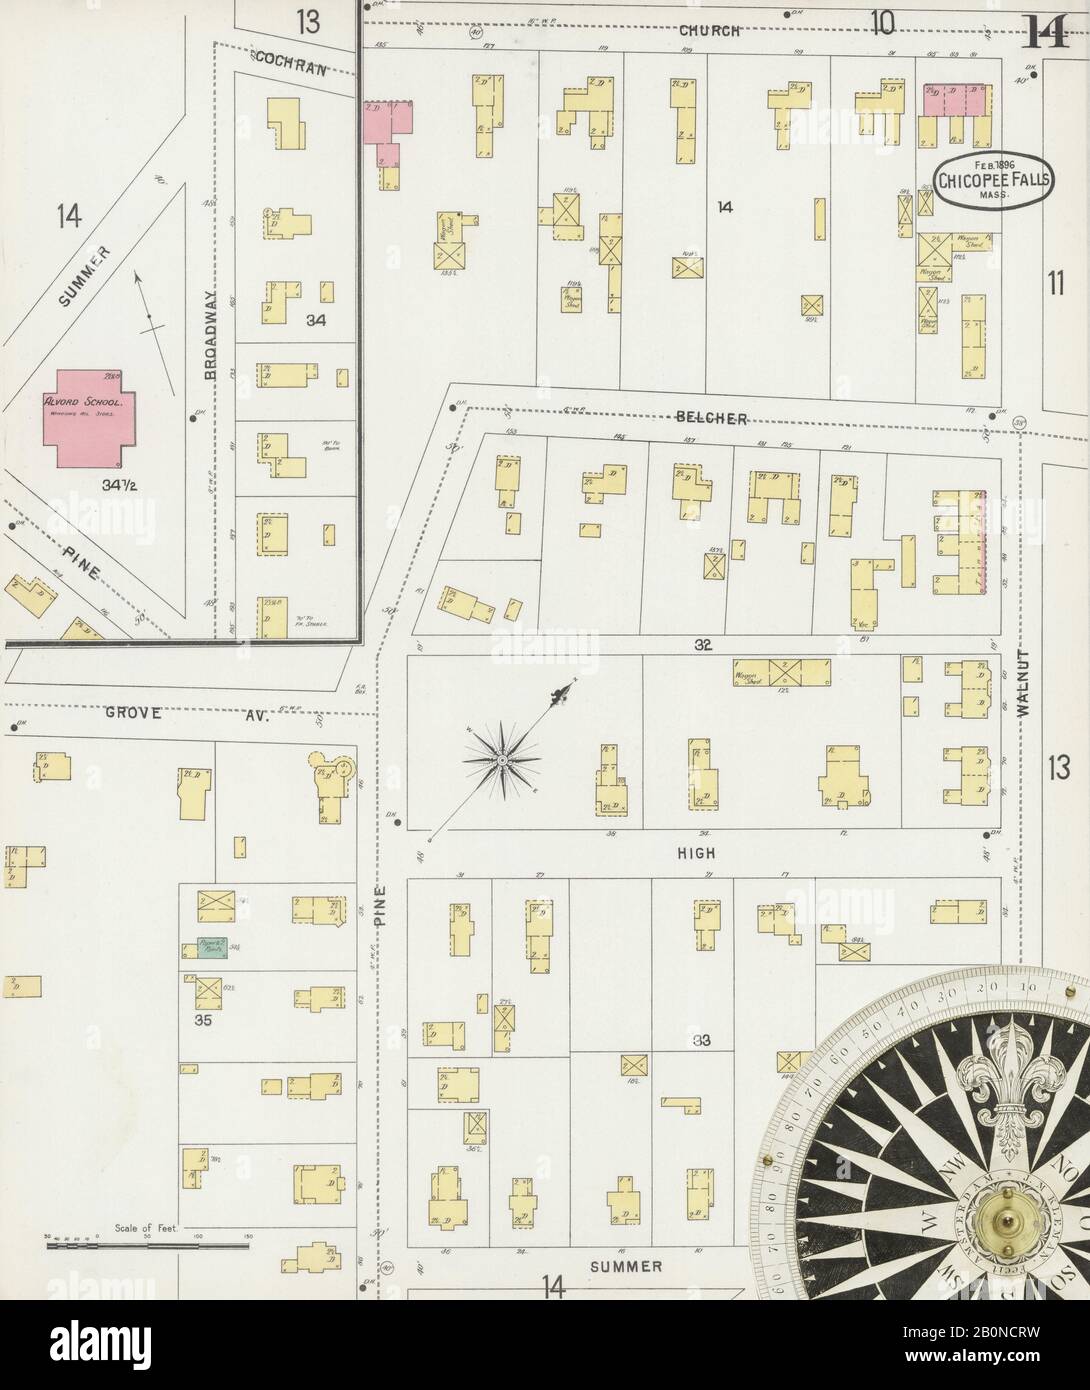 Image 14 of Sanborn Fire Insurance Map from Chicopee, Hampden County, Massachusetts. Feb 1896. 16 Sheet(s). Includes Chicopee Falls, America, street map with a Nineteenth Century compass Stock Photo